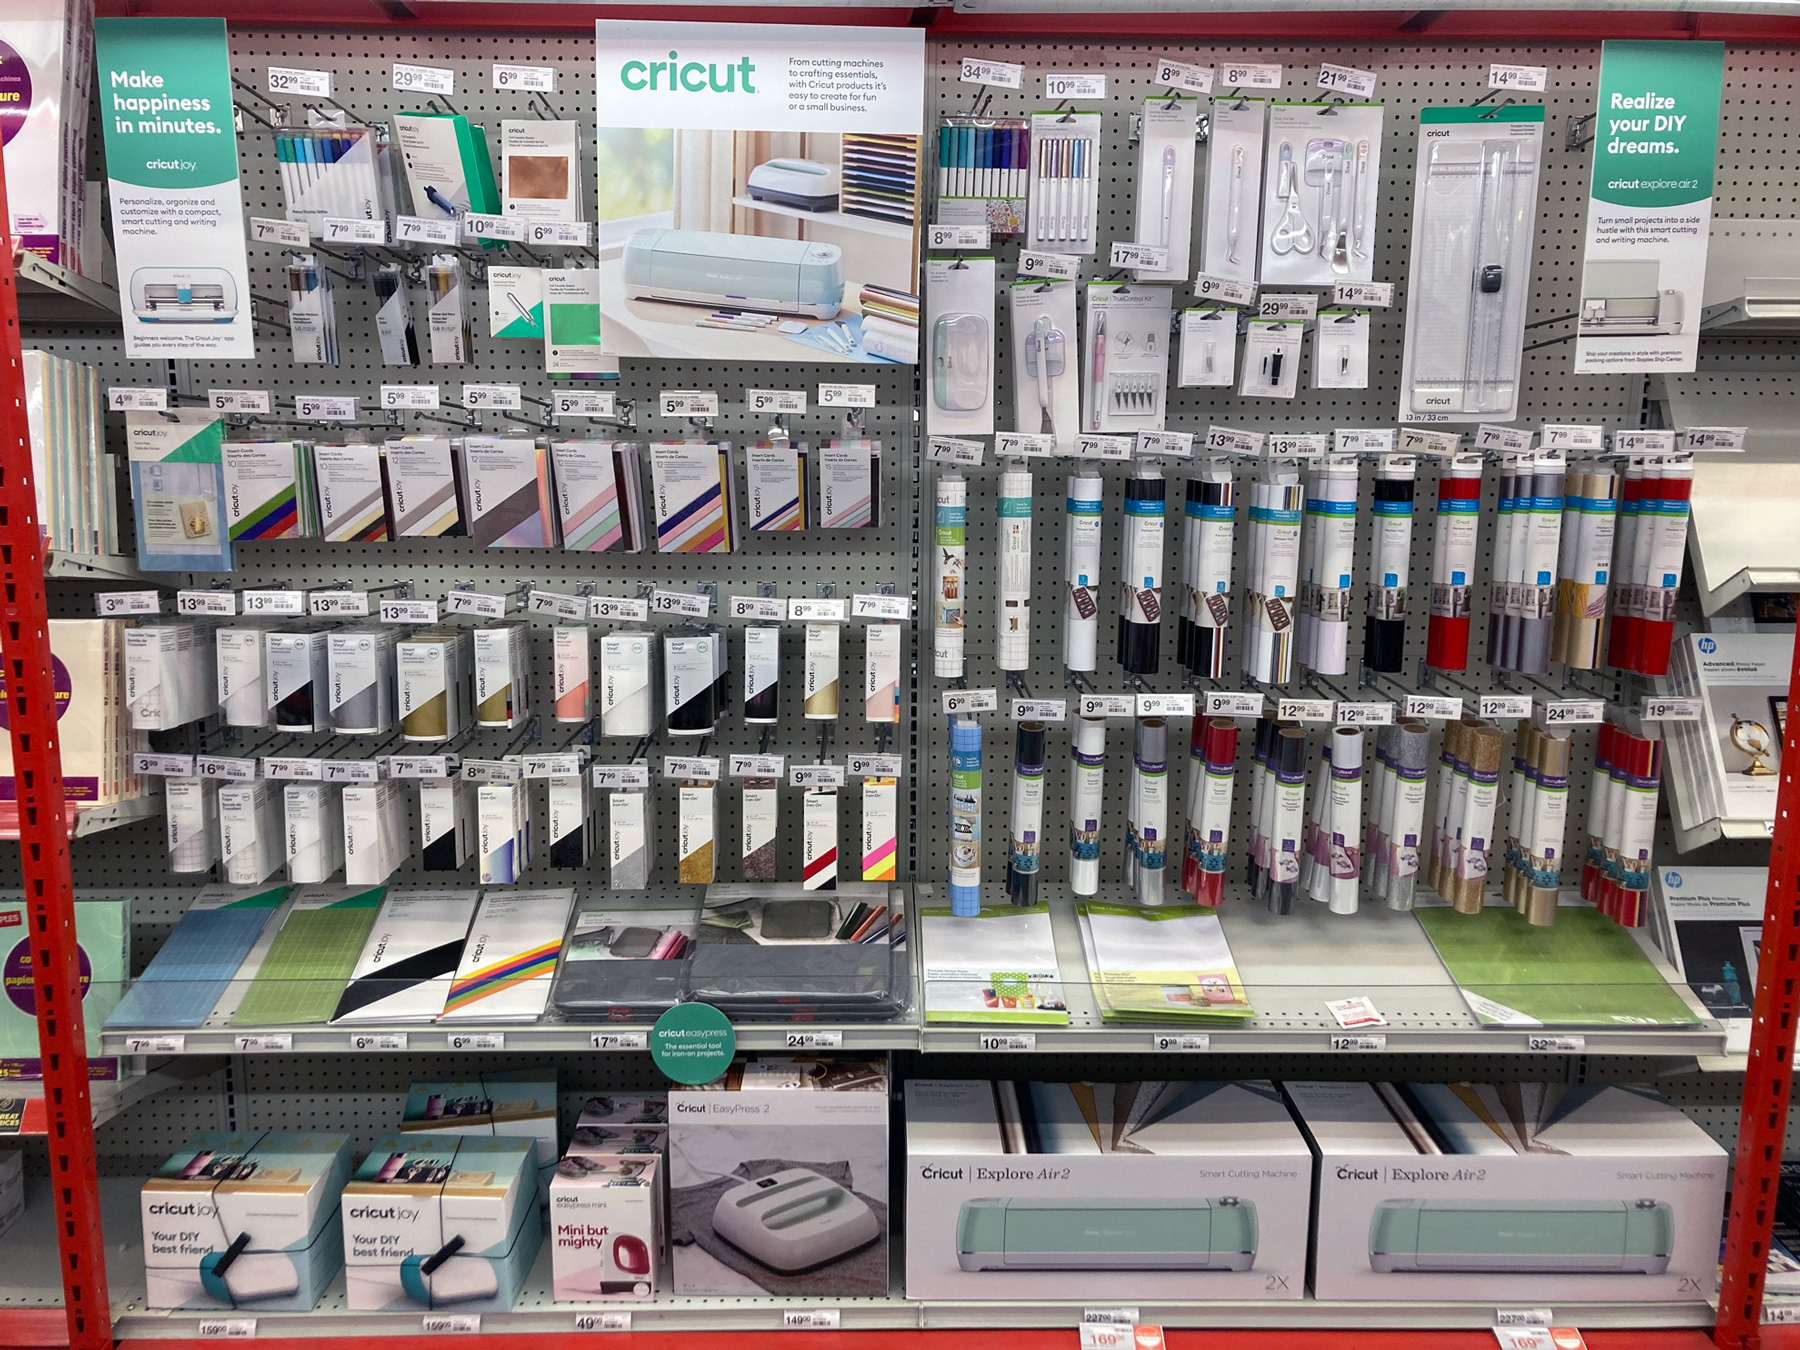 Staples store display of Cricut machines and materials